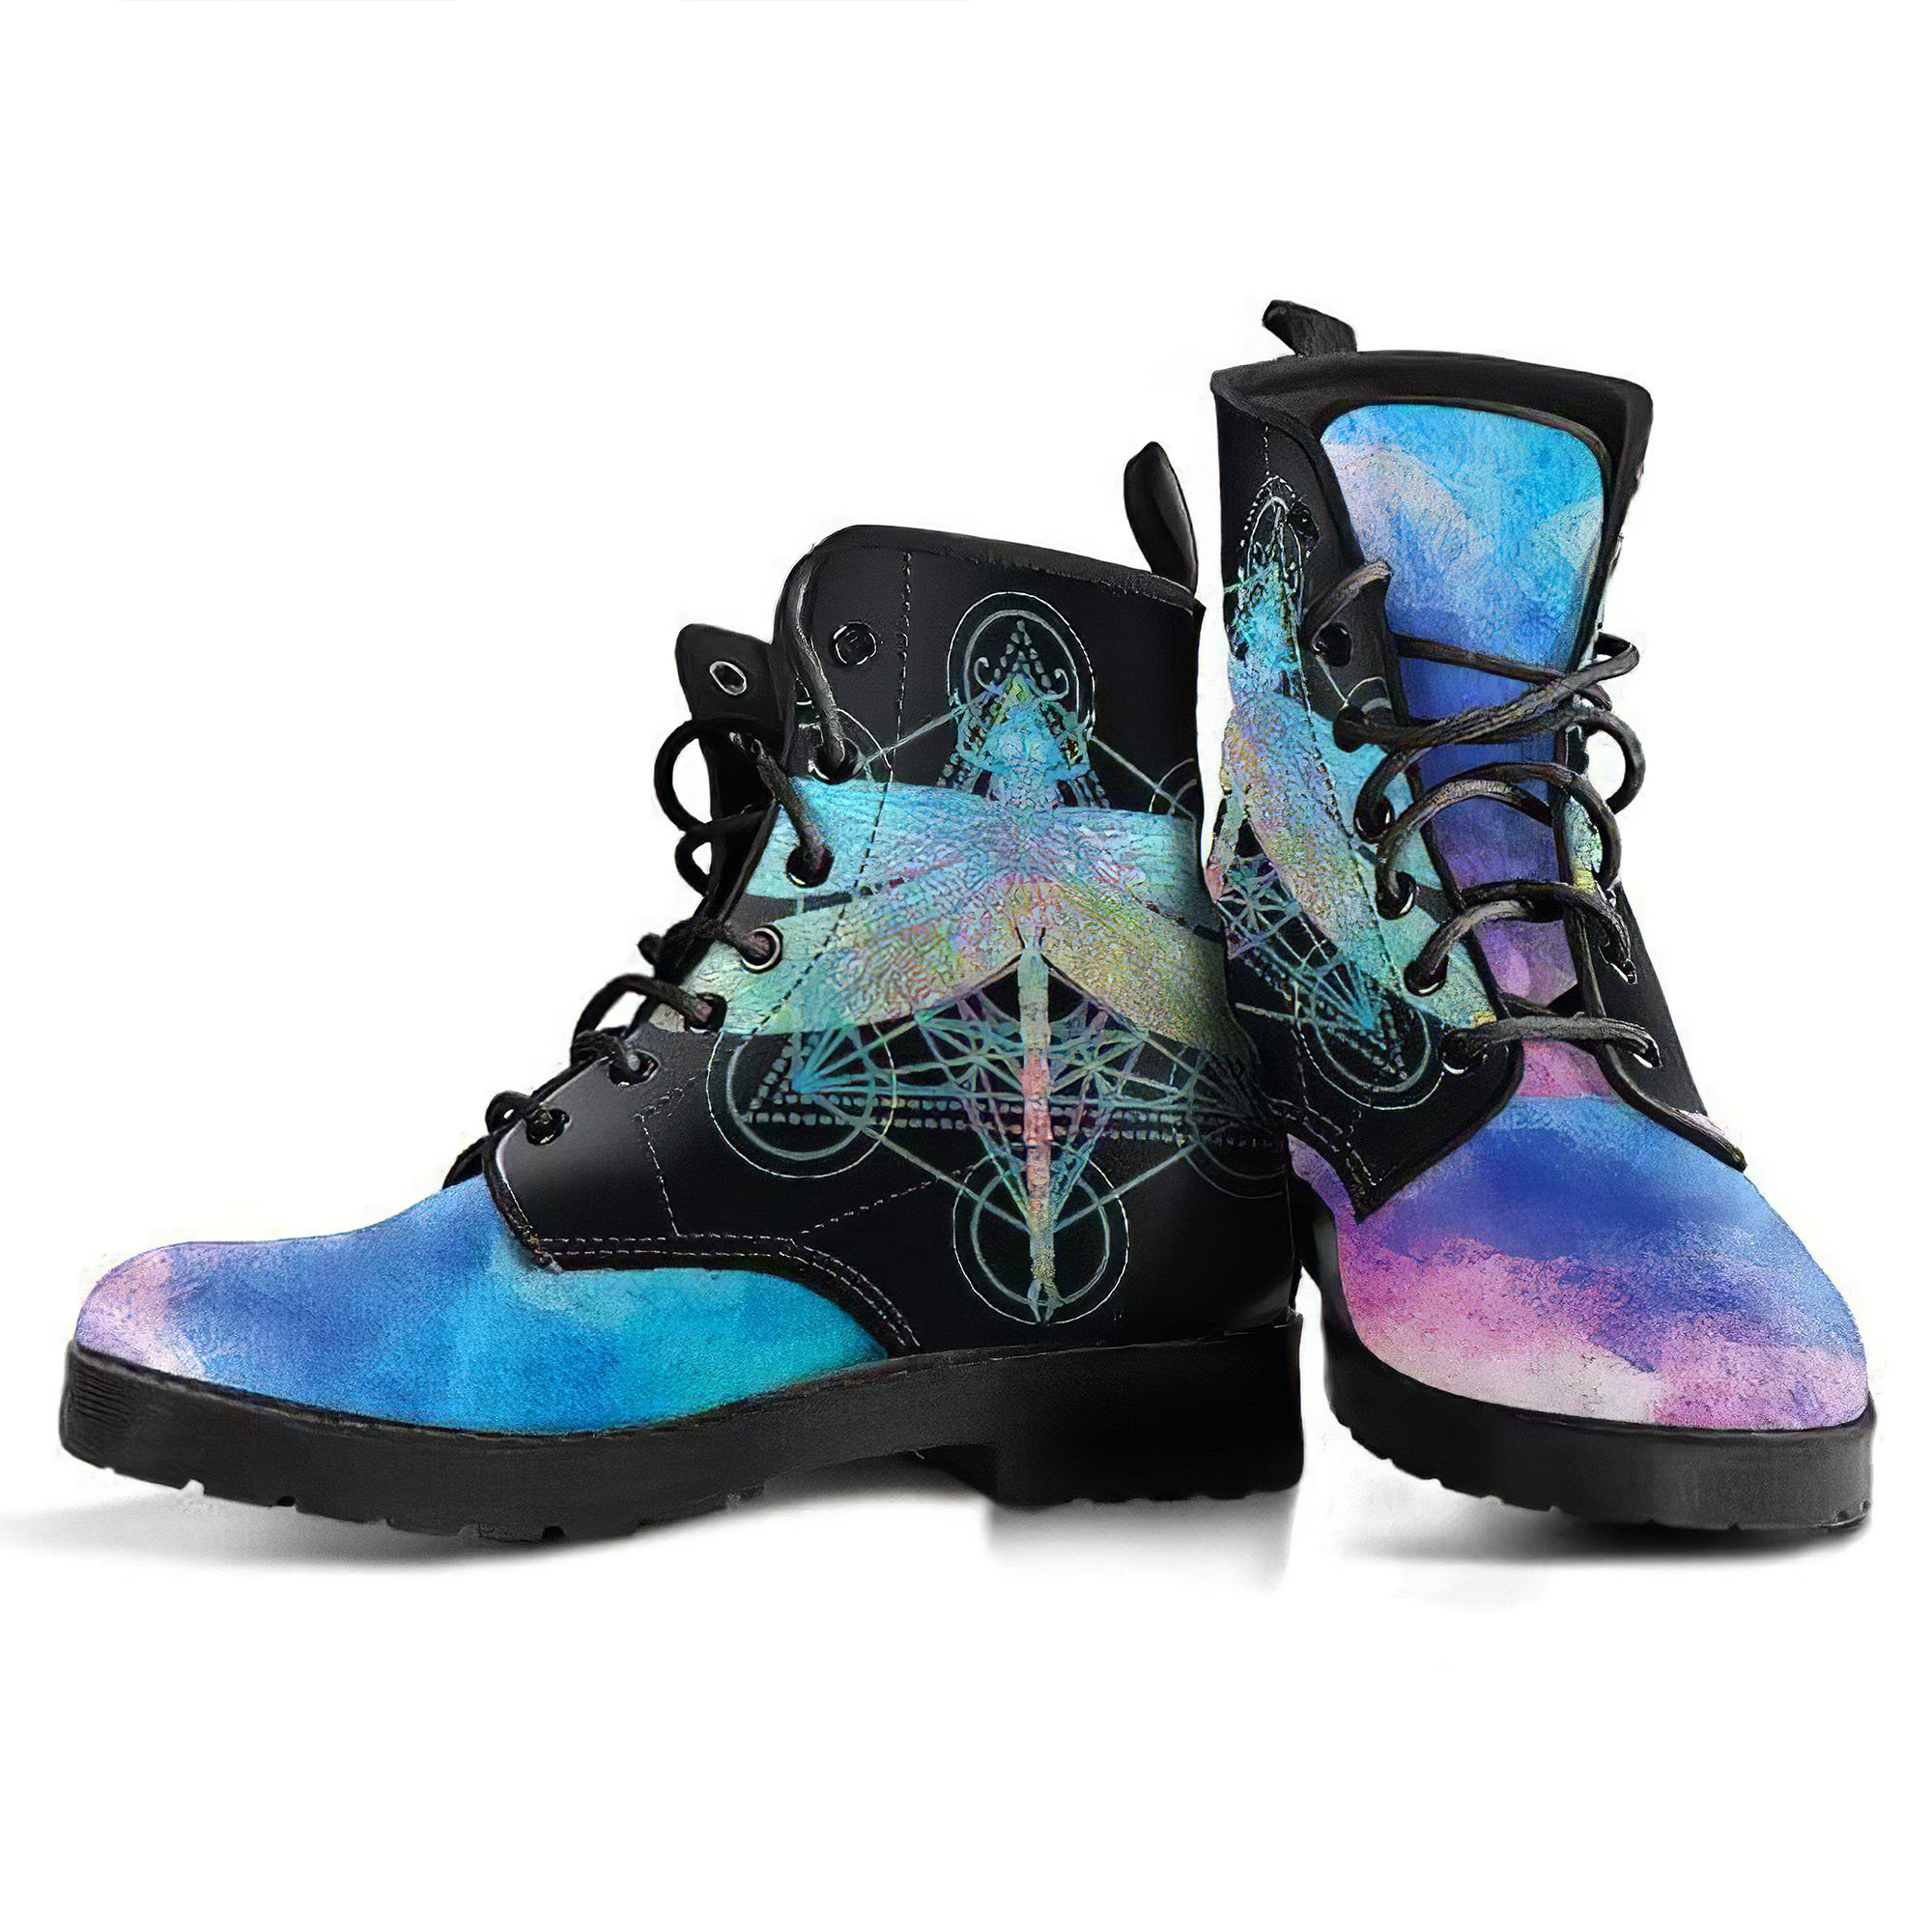 dragonfly-handcrafted-boots-gp-main.jpg